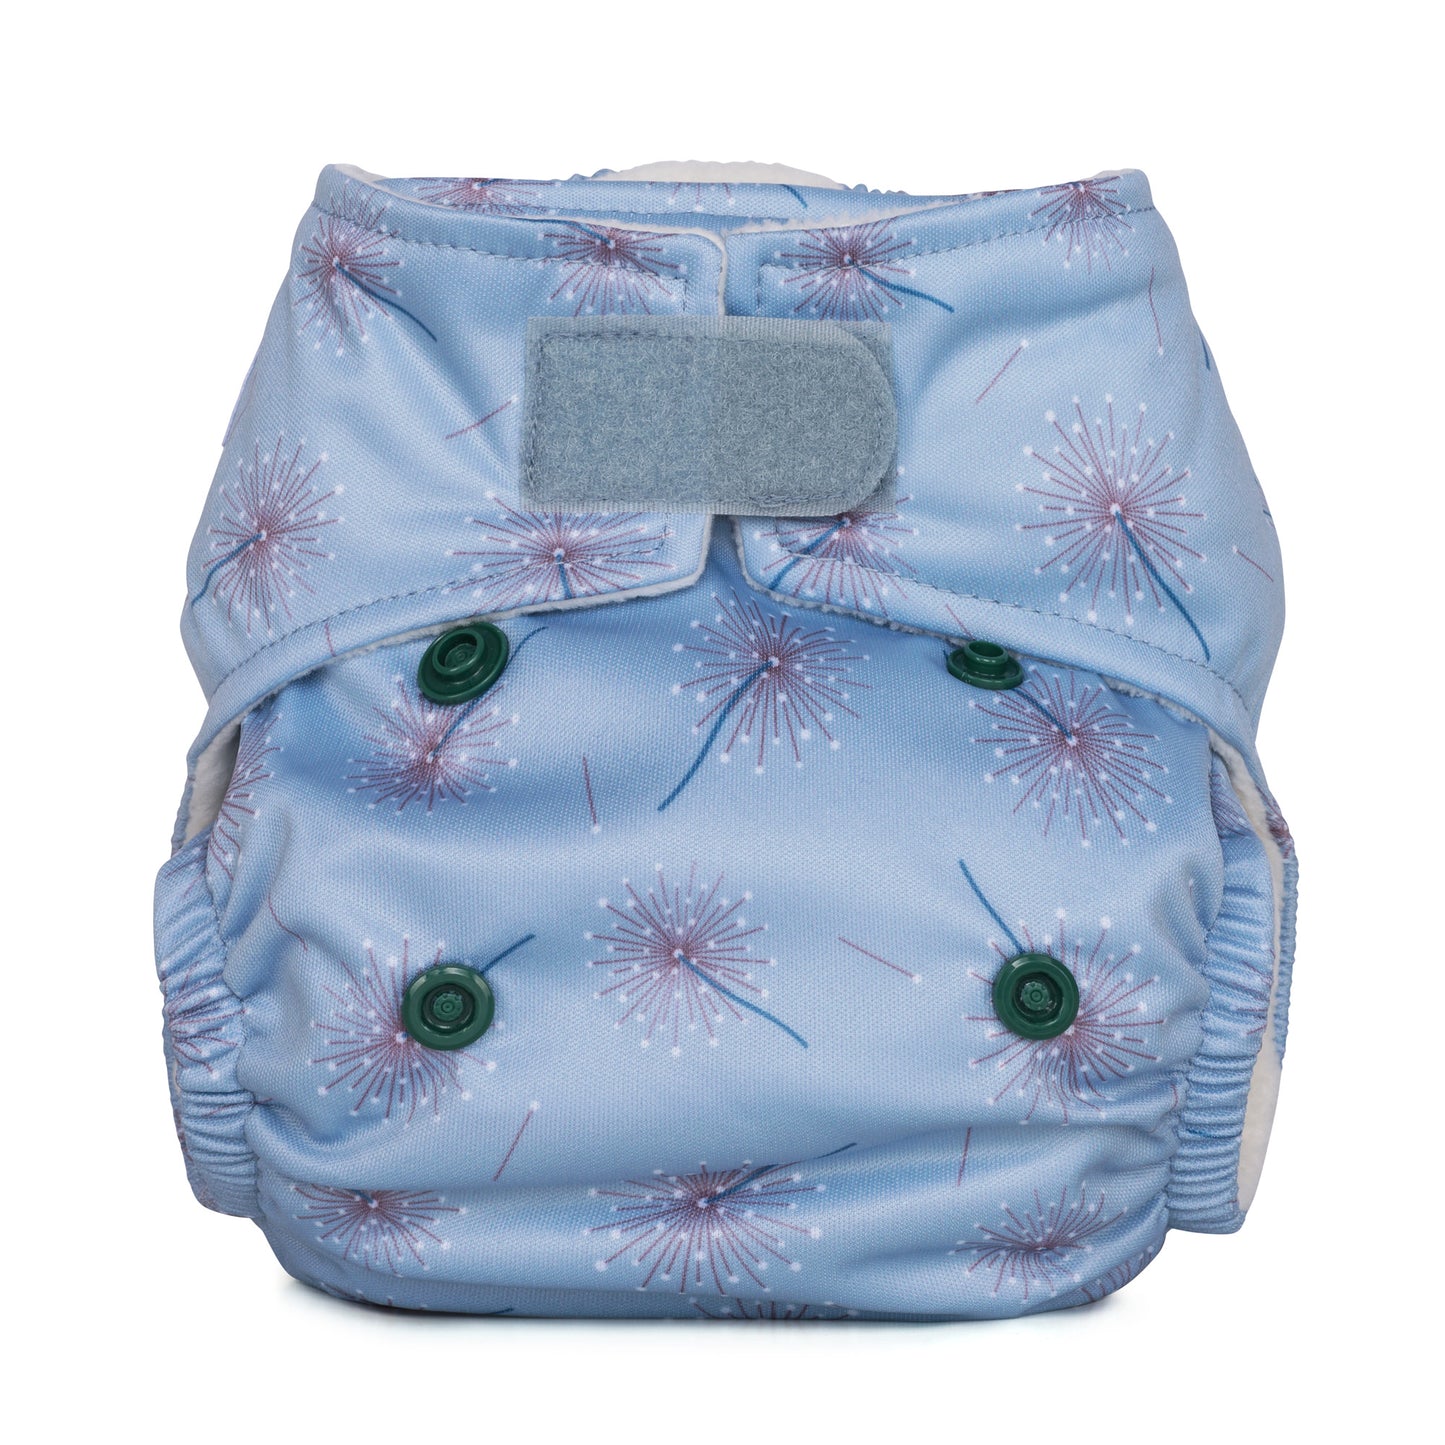 A pale blue newborn nappy with a dandelion pattern and velcro fastening. 